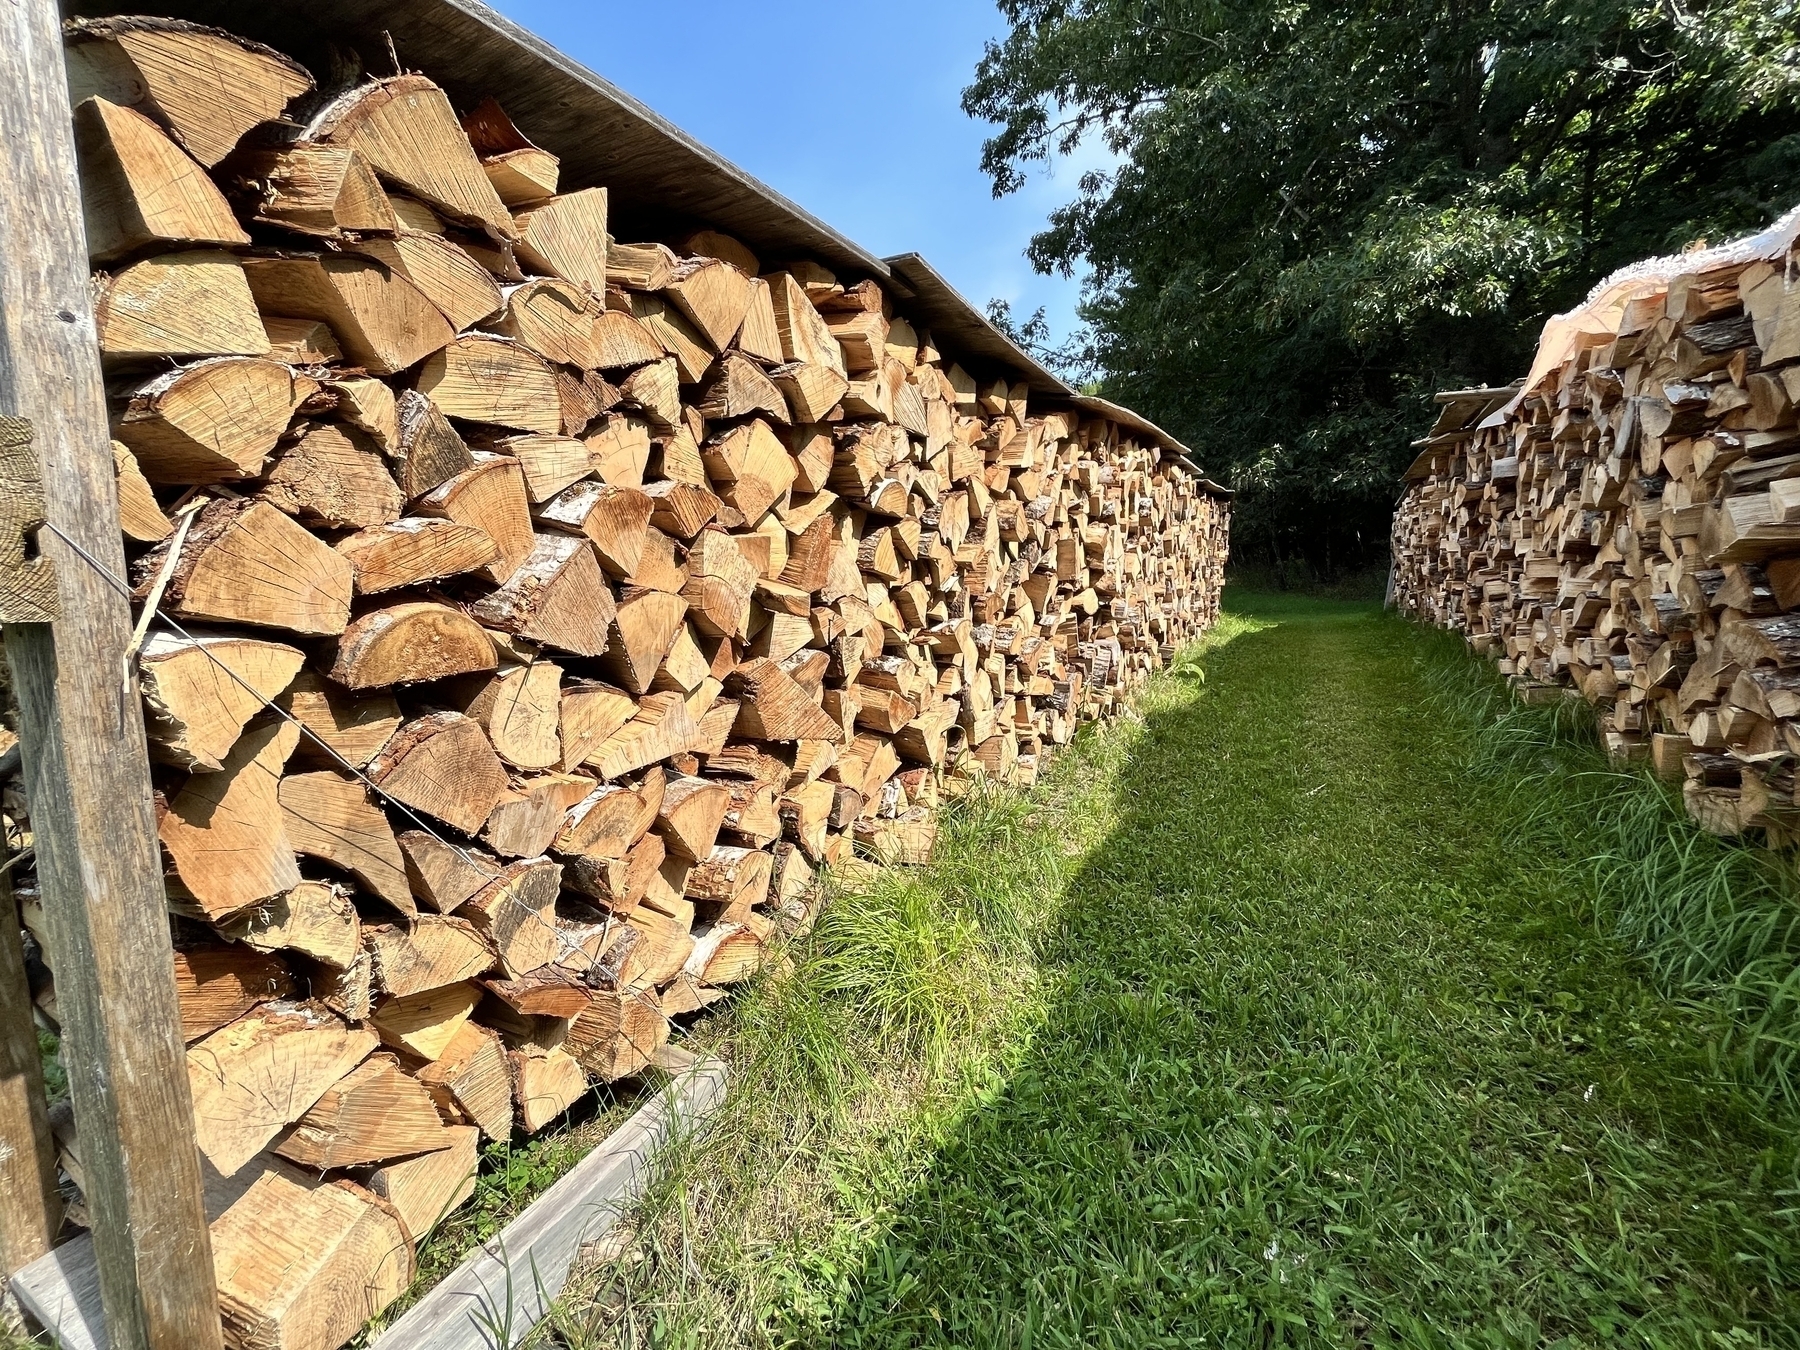 Two rows of stacked firewood